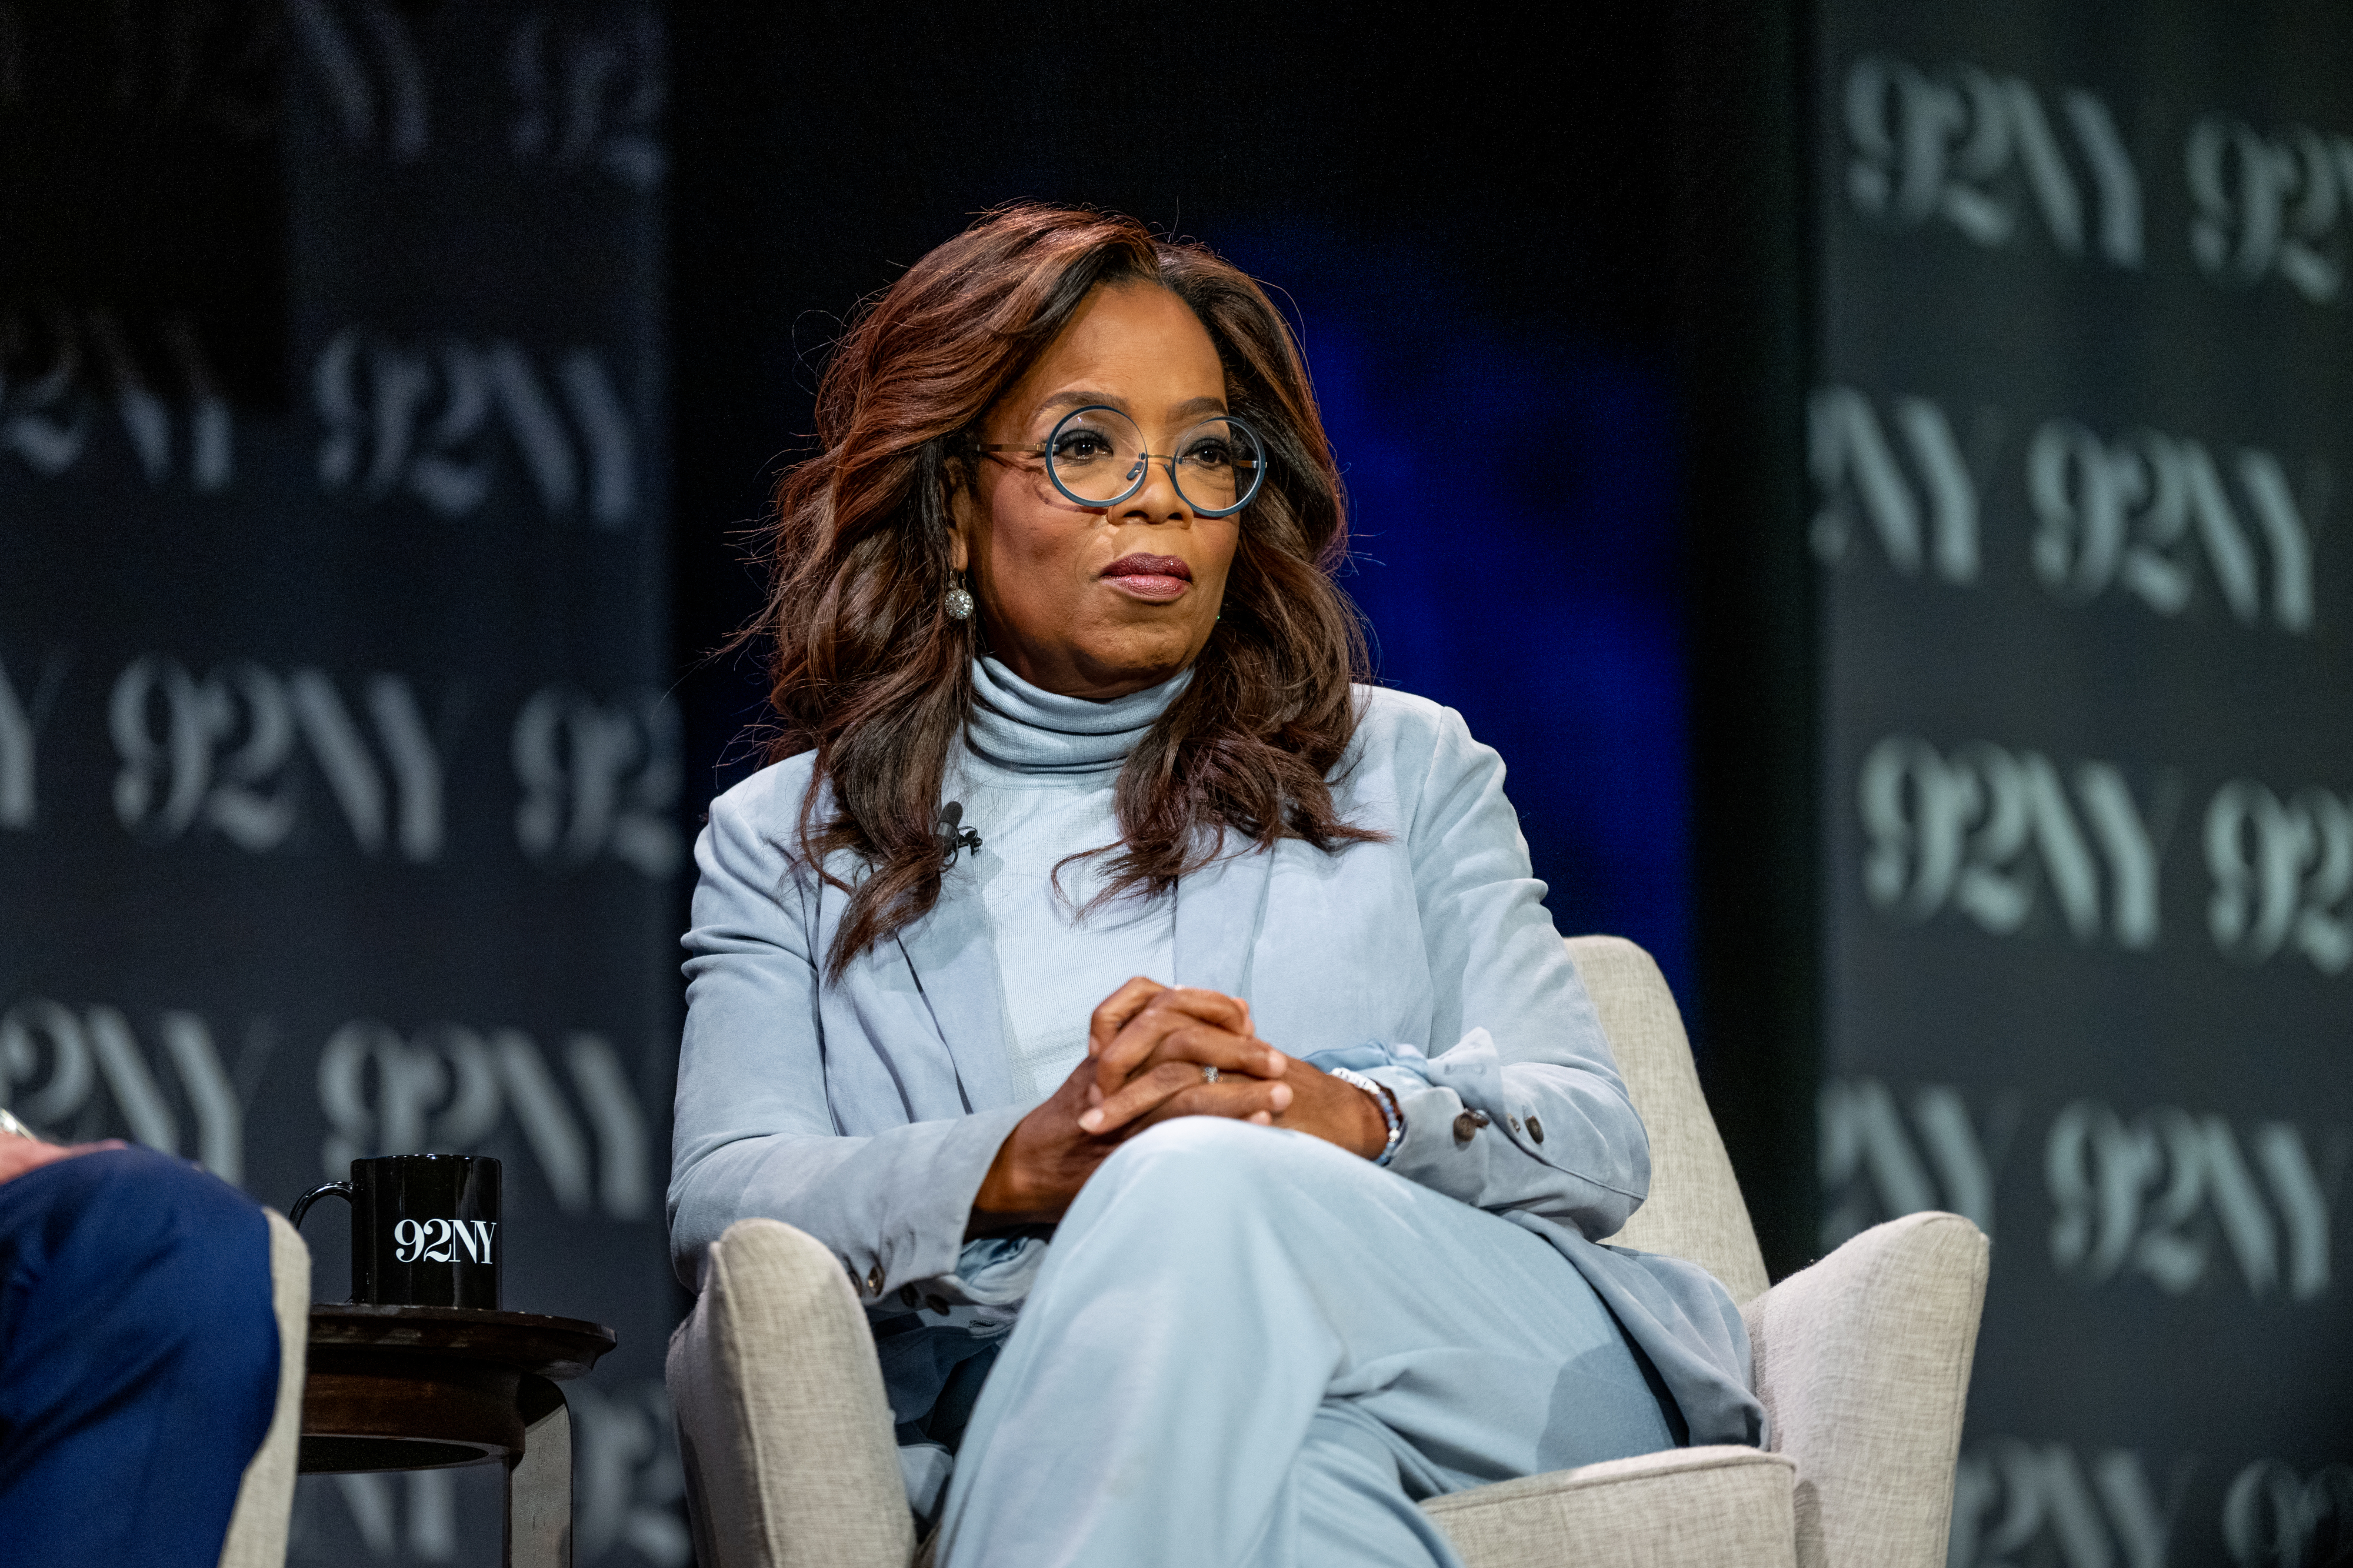 Oprah Winfrey in a panel discussion, wearing a tailored suit, seated with hands crossed